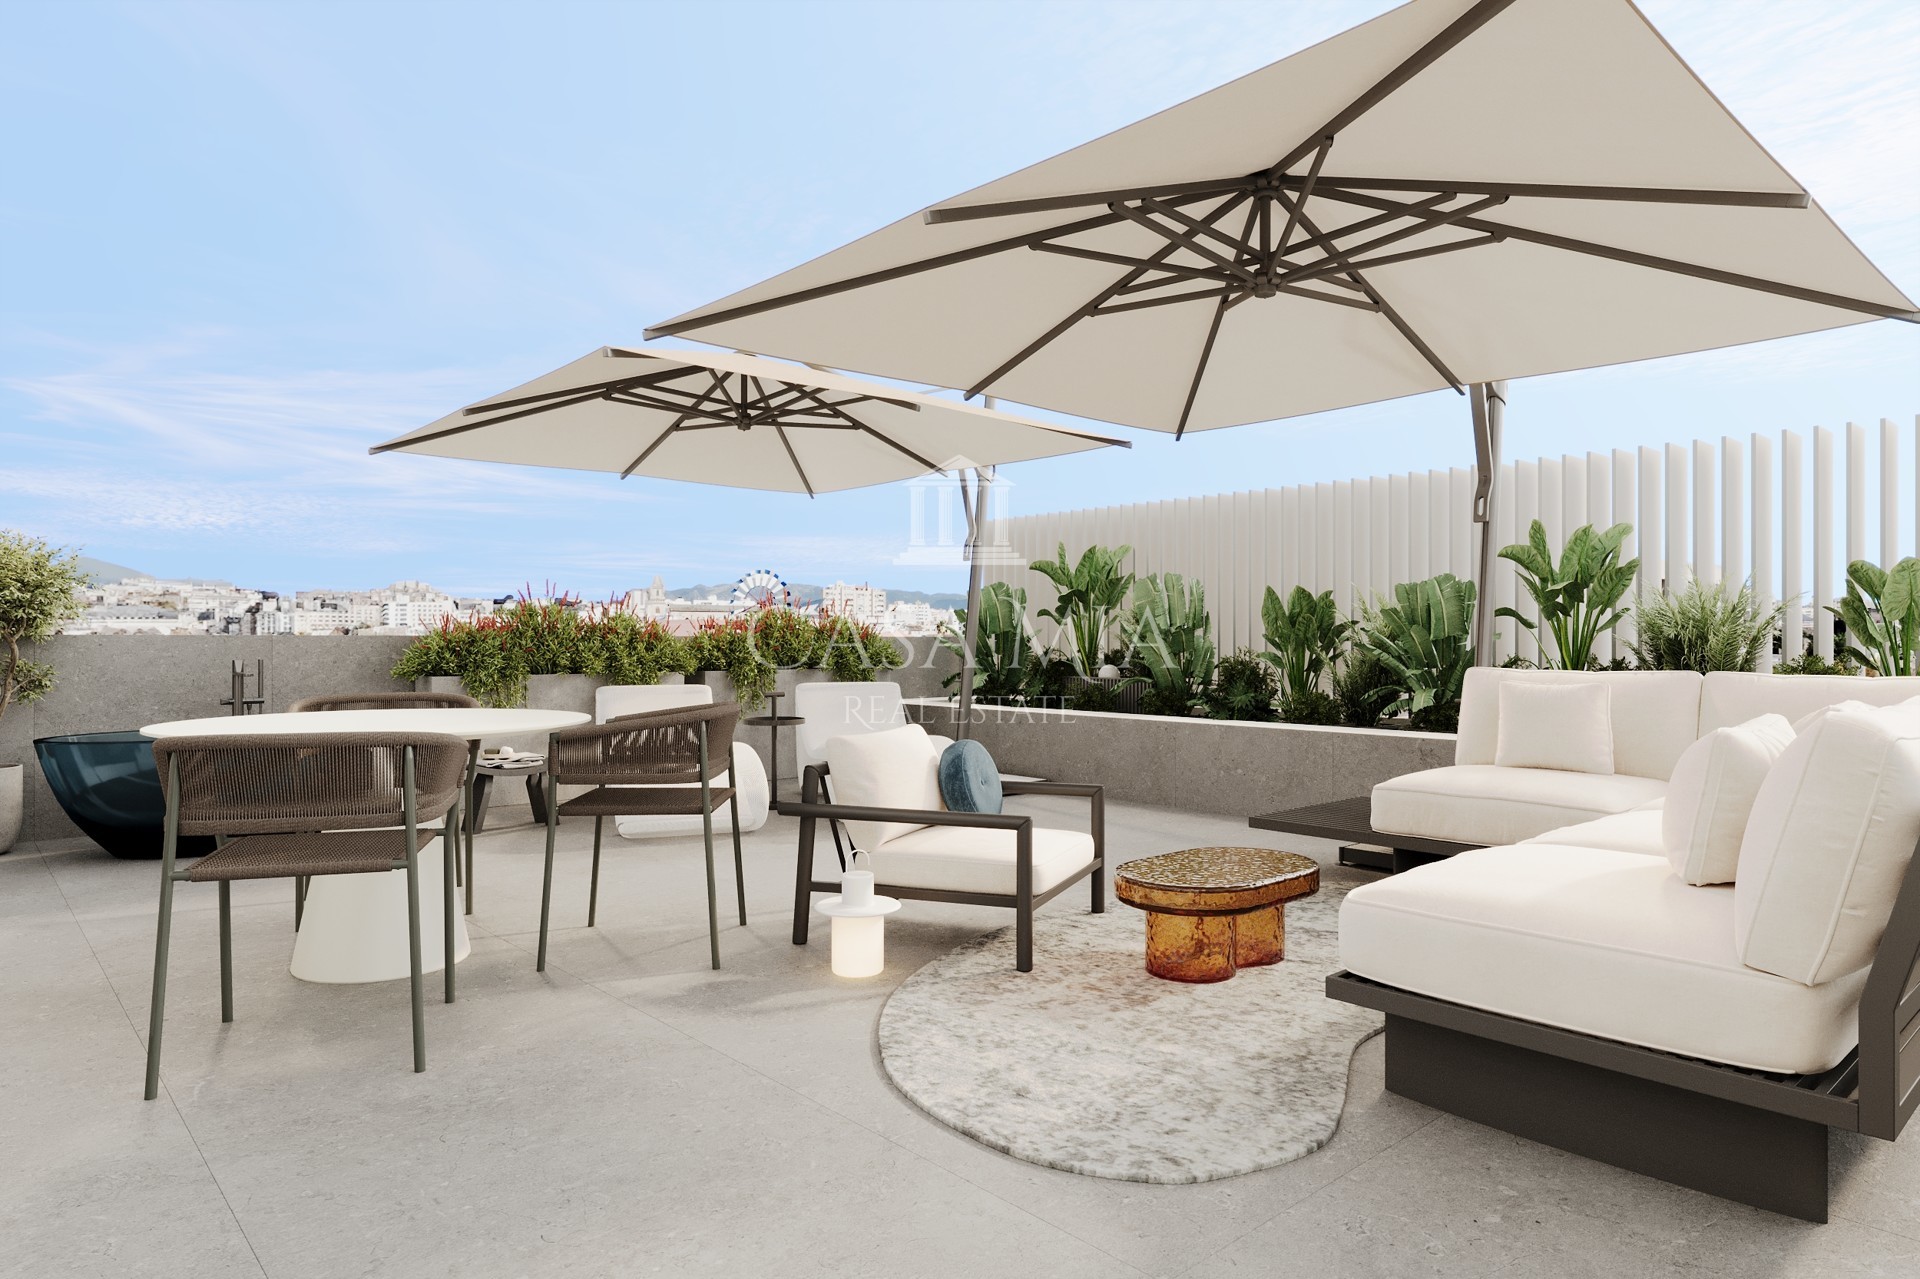 South facing penthouse with private roof terrace & jacuzzi, Palma